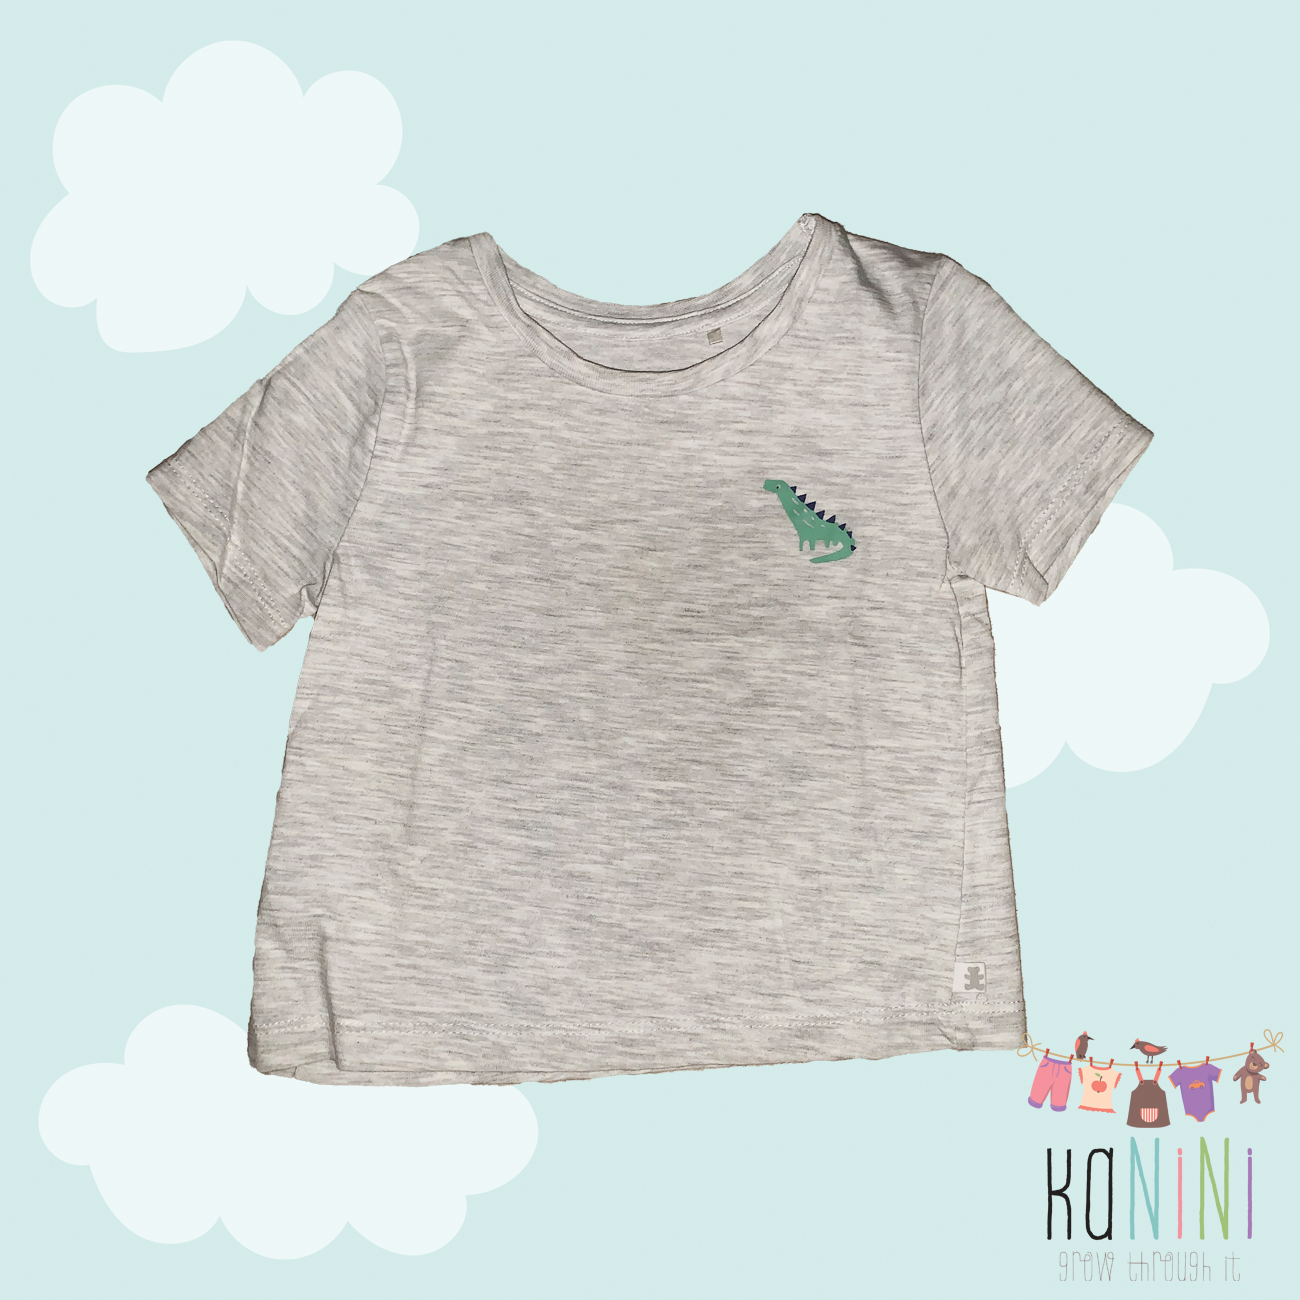 Featured image for “Woolworths 12 - 18 Months Boys Grey T-Shirt”